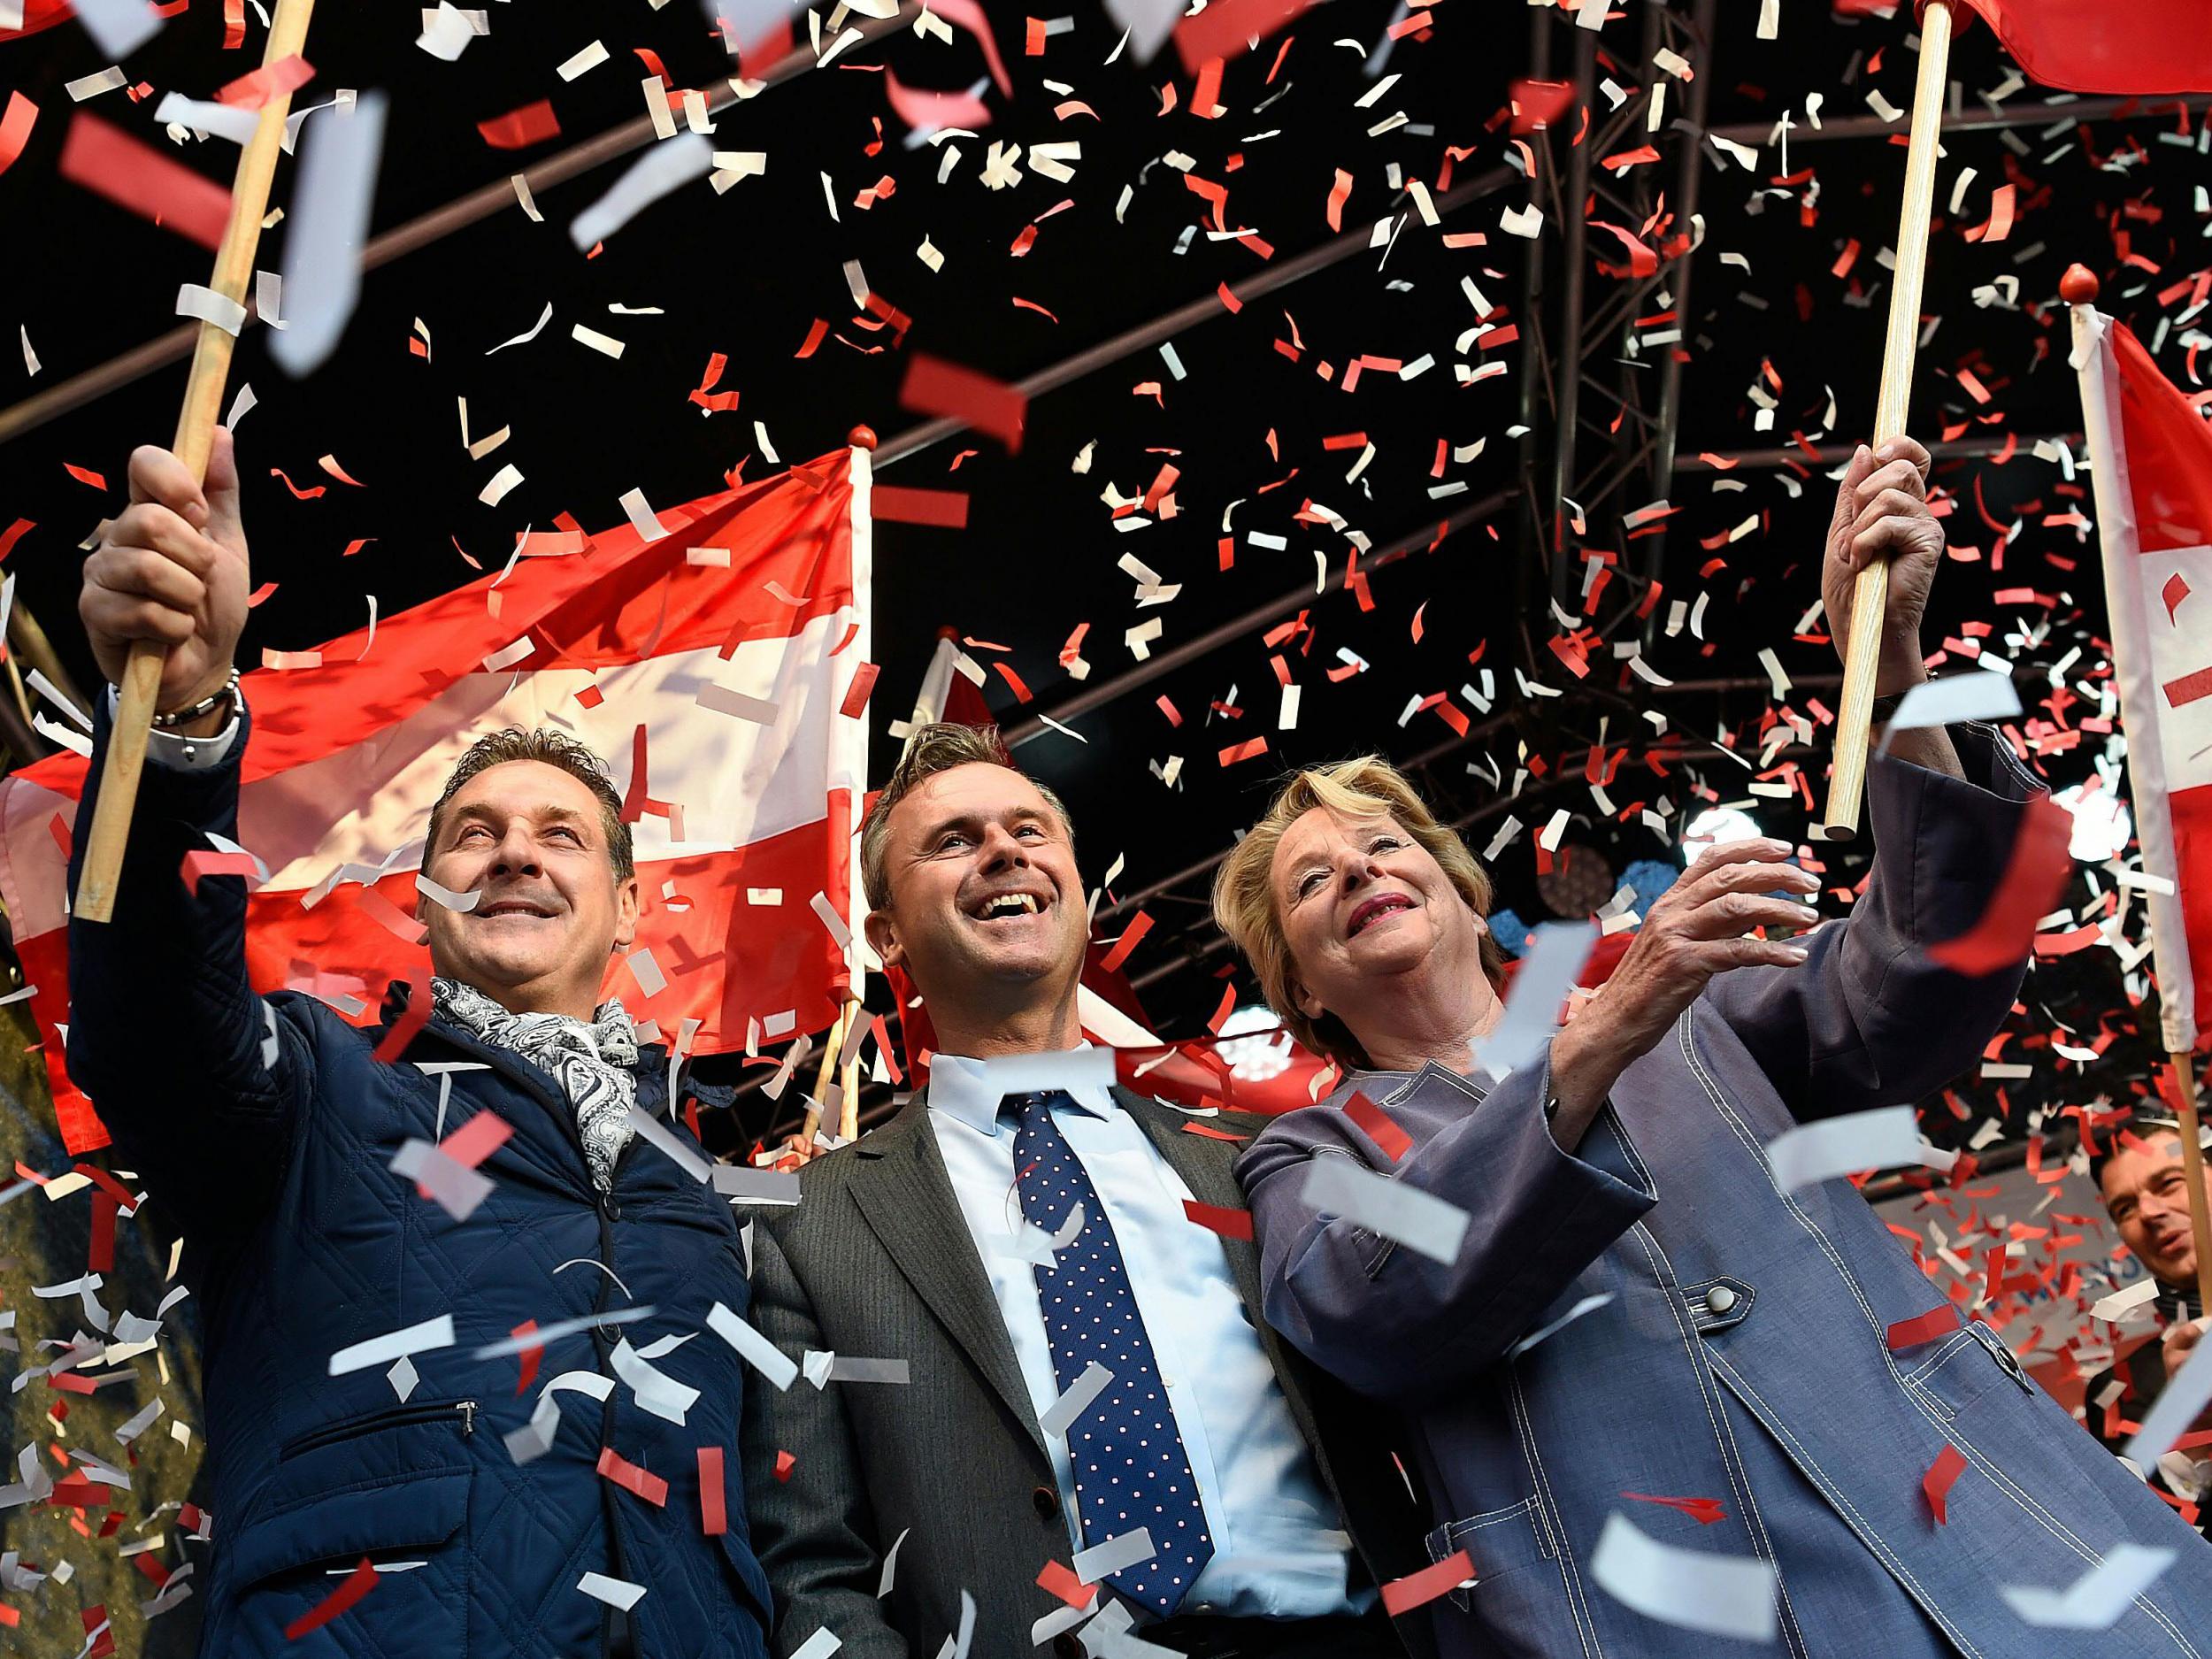 Freedom Party presidential candidate Norbert Hofer at a rally in May (Getty)